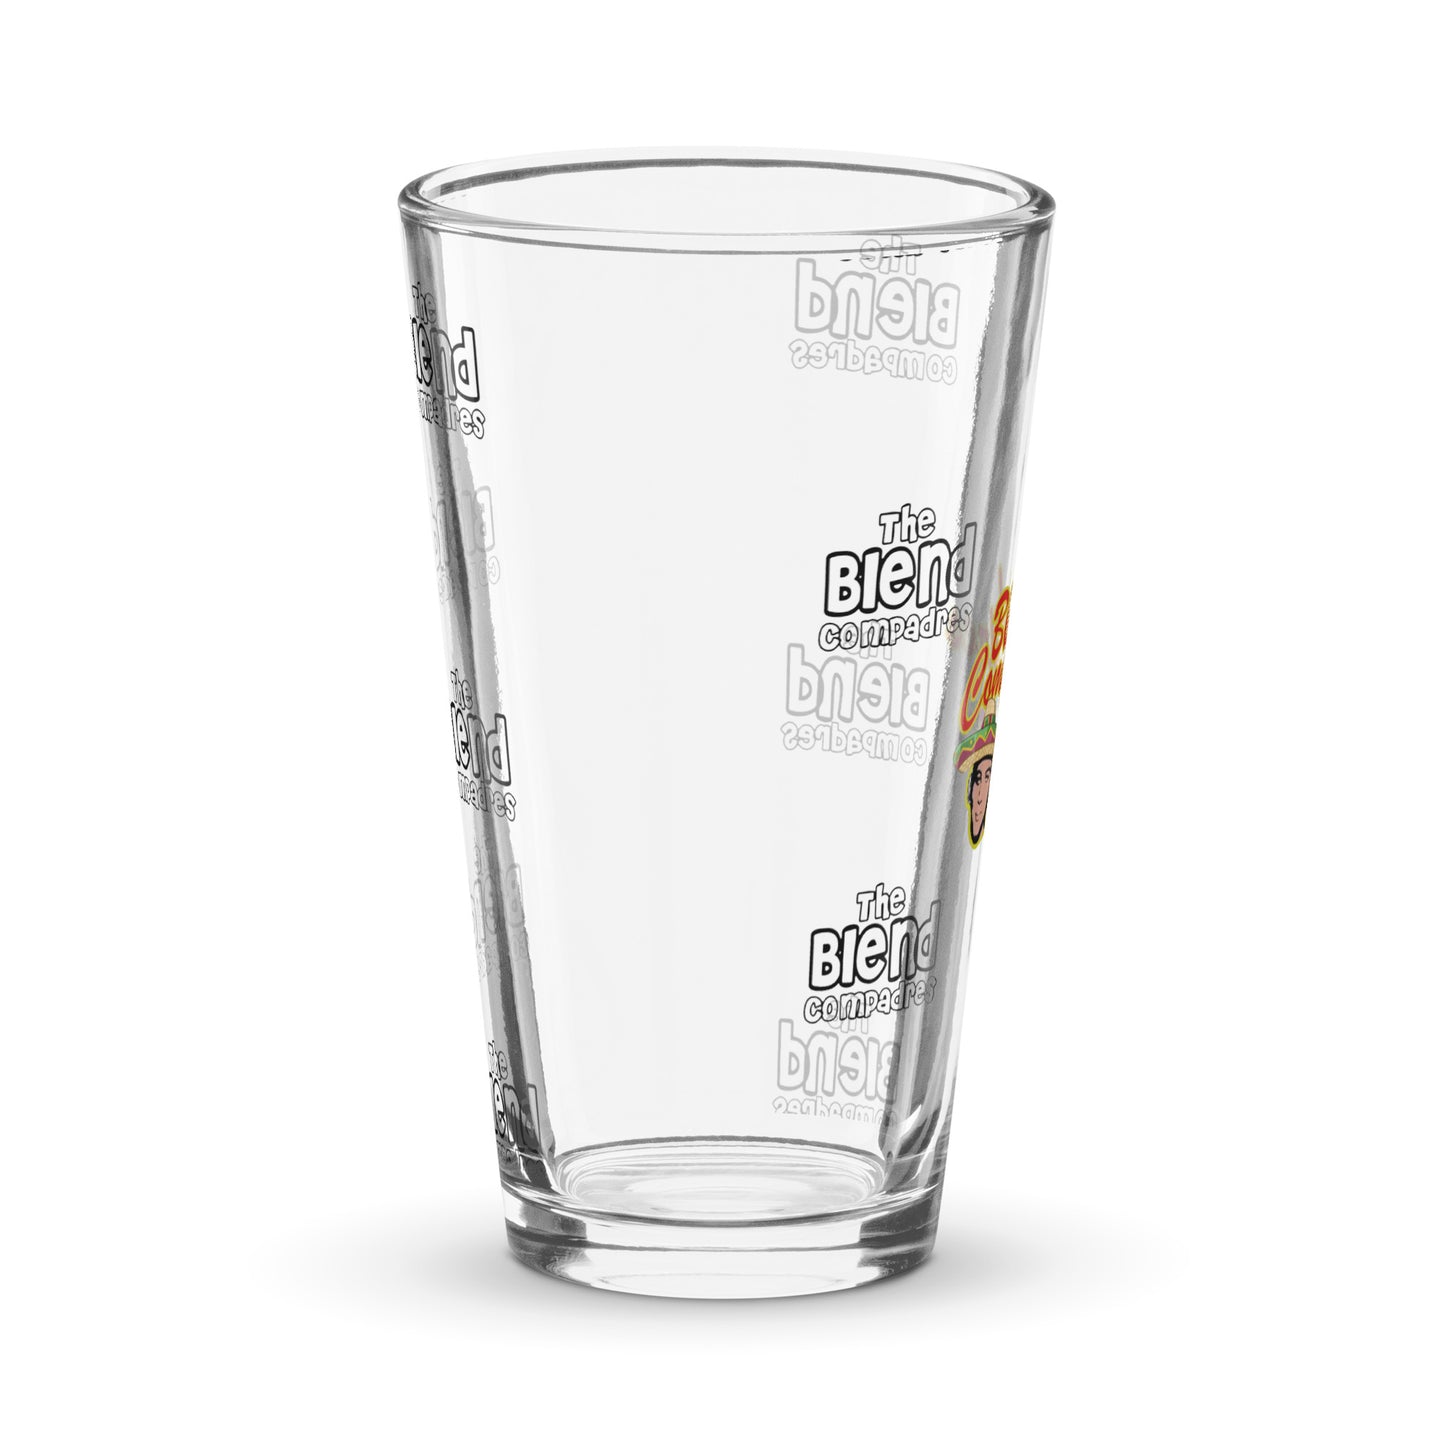 The Blend Compadres Shaker pint glass - Another Bodega